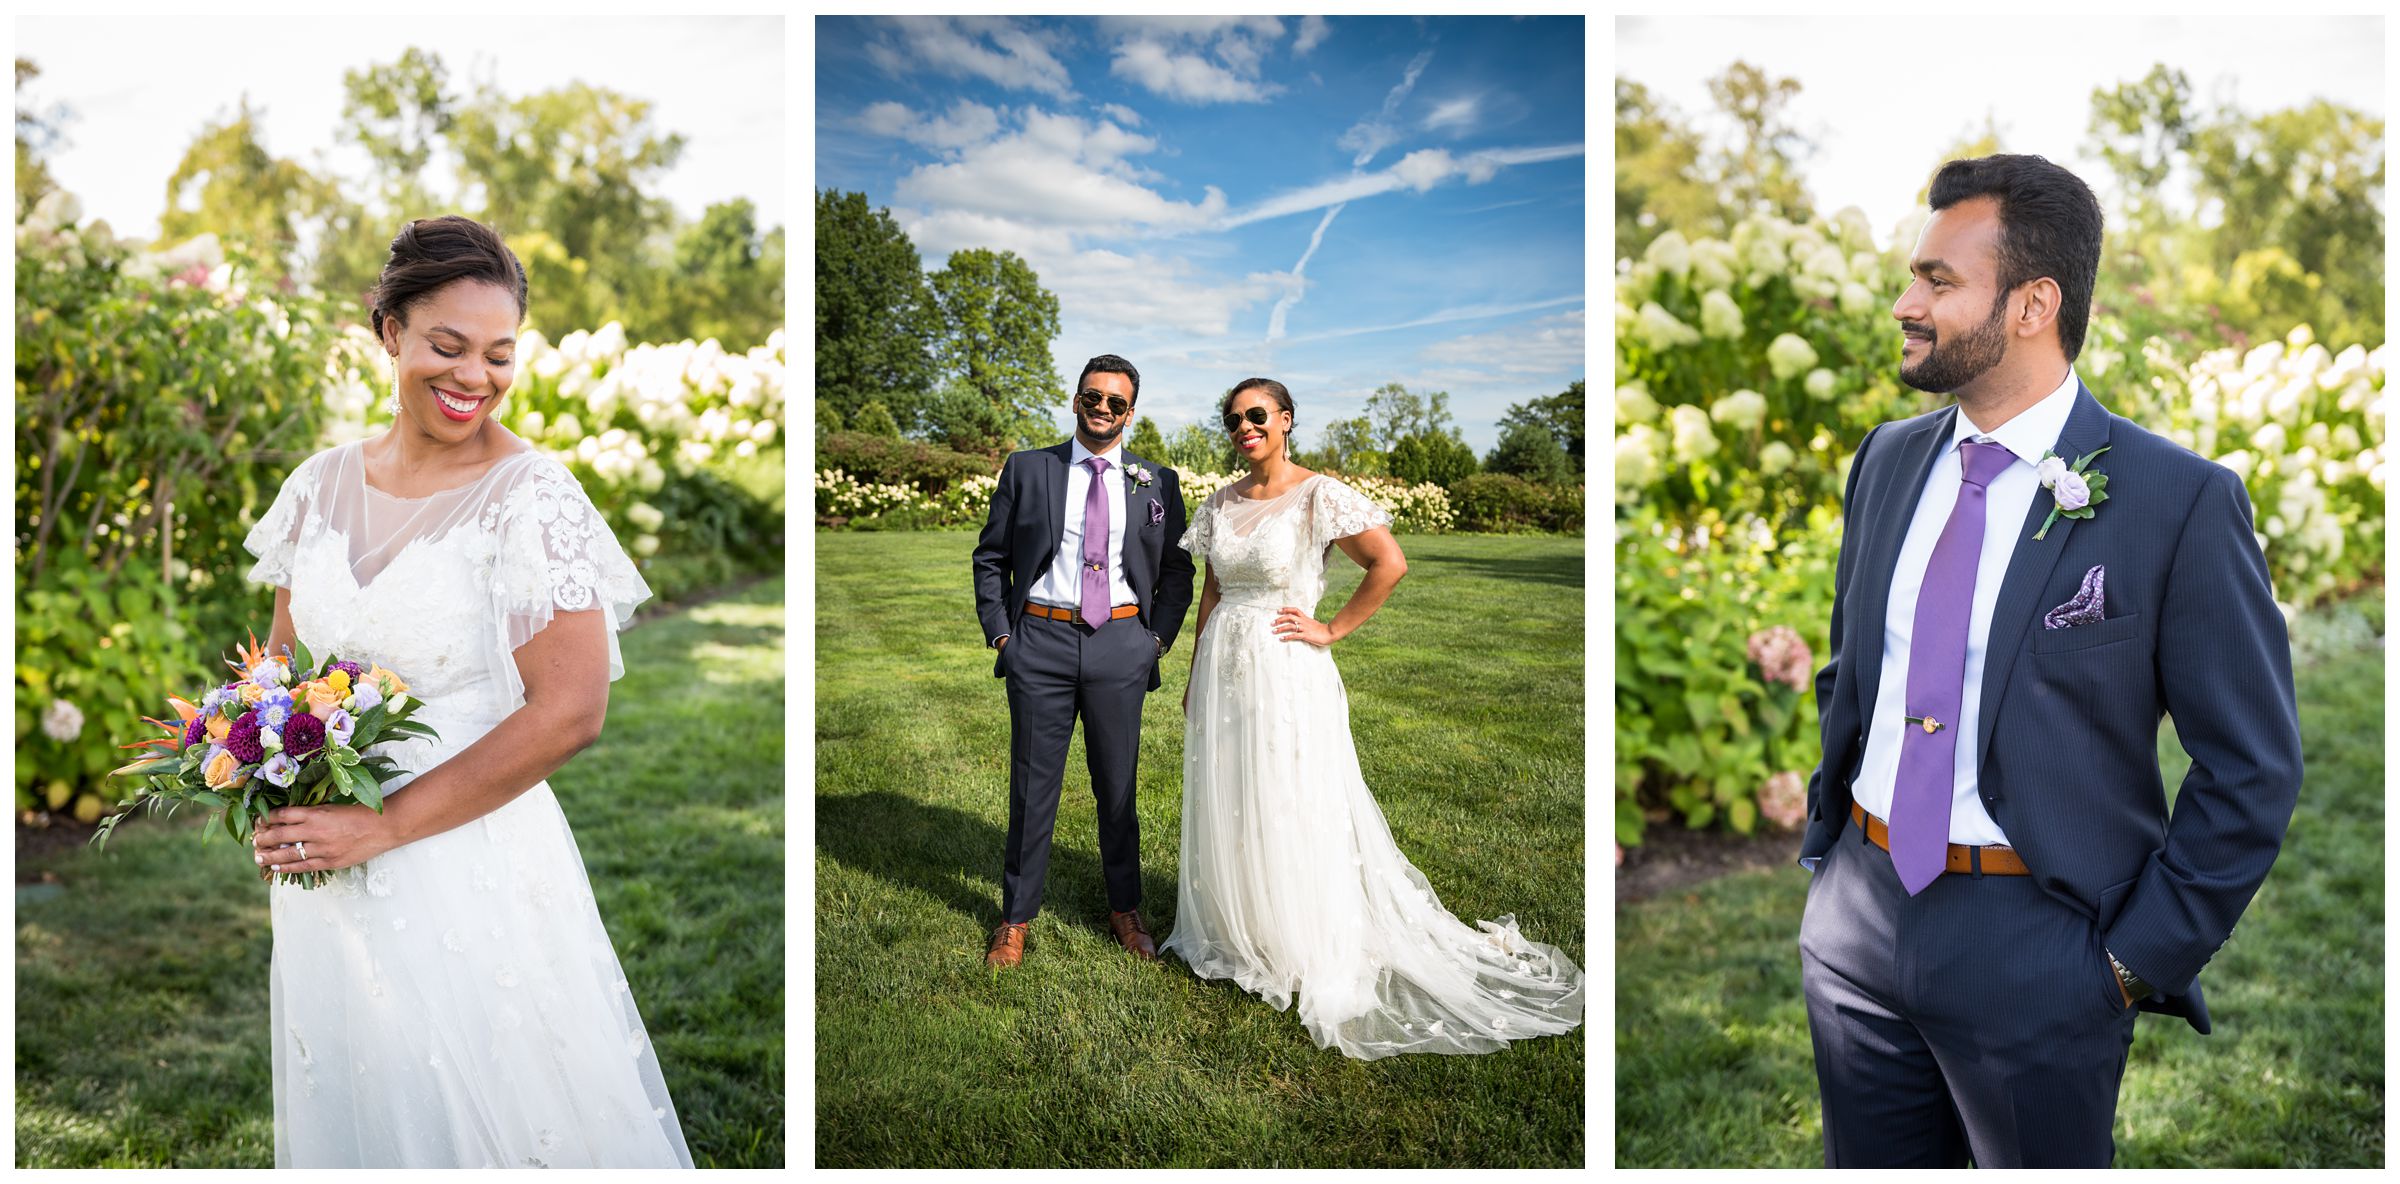 bride in lace wedding dress with flutter sleeves and groom in navy suit with purple tie wearing sunglasses during summer wedding